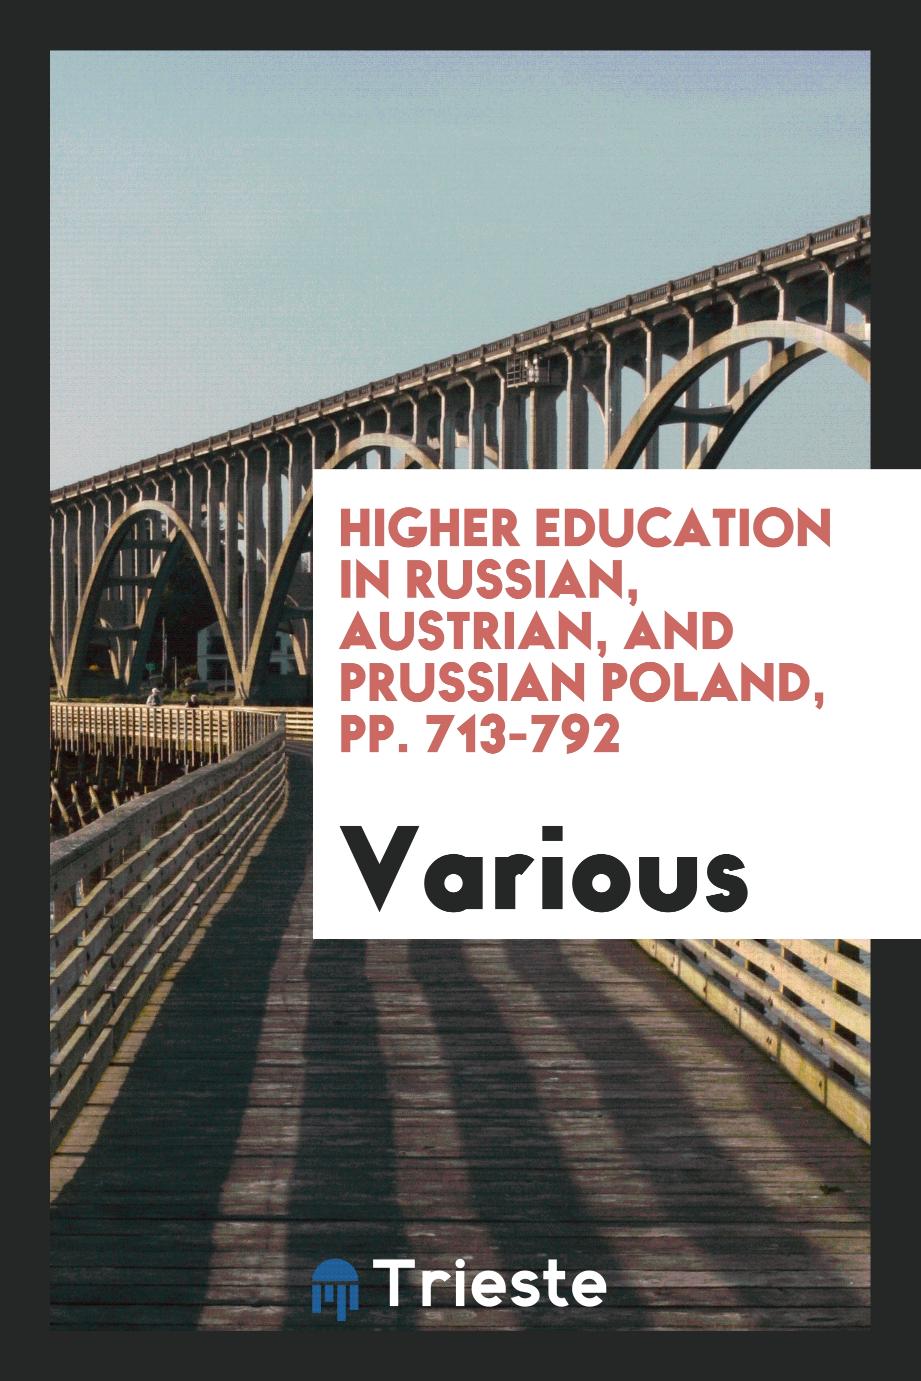 Higher education in Russian, Austrian, and Prussian Poland, pp. 713-792